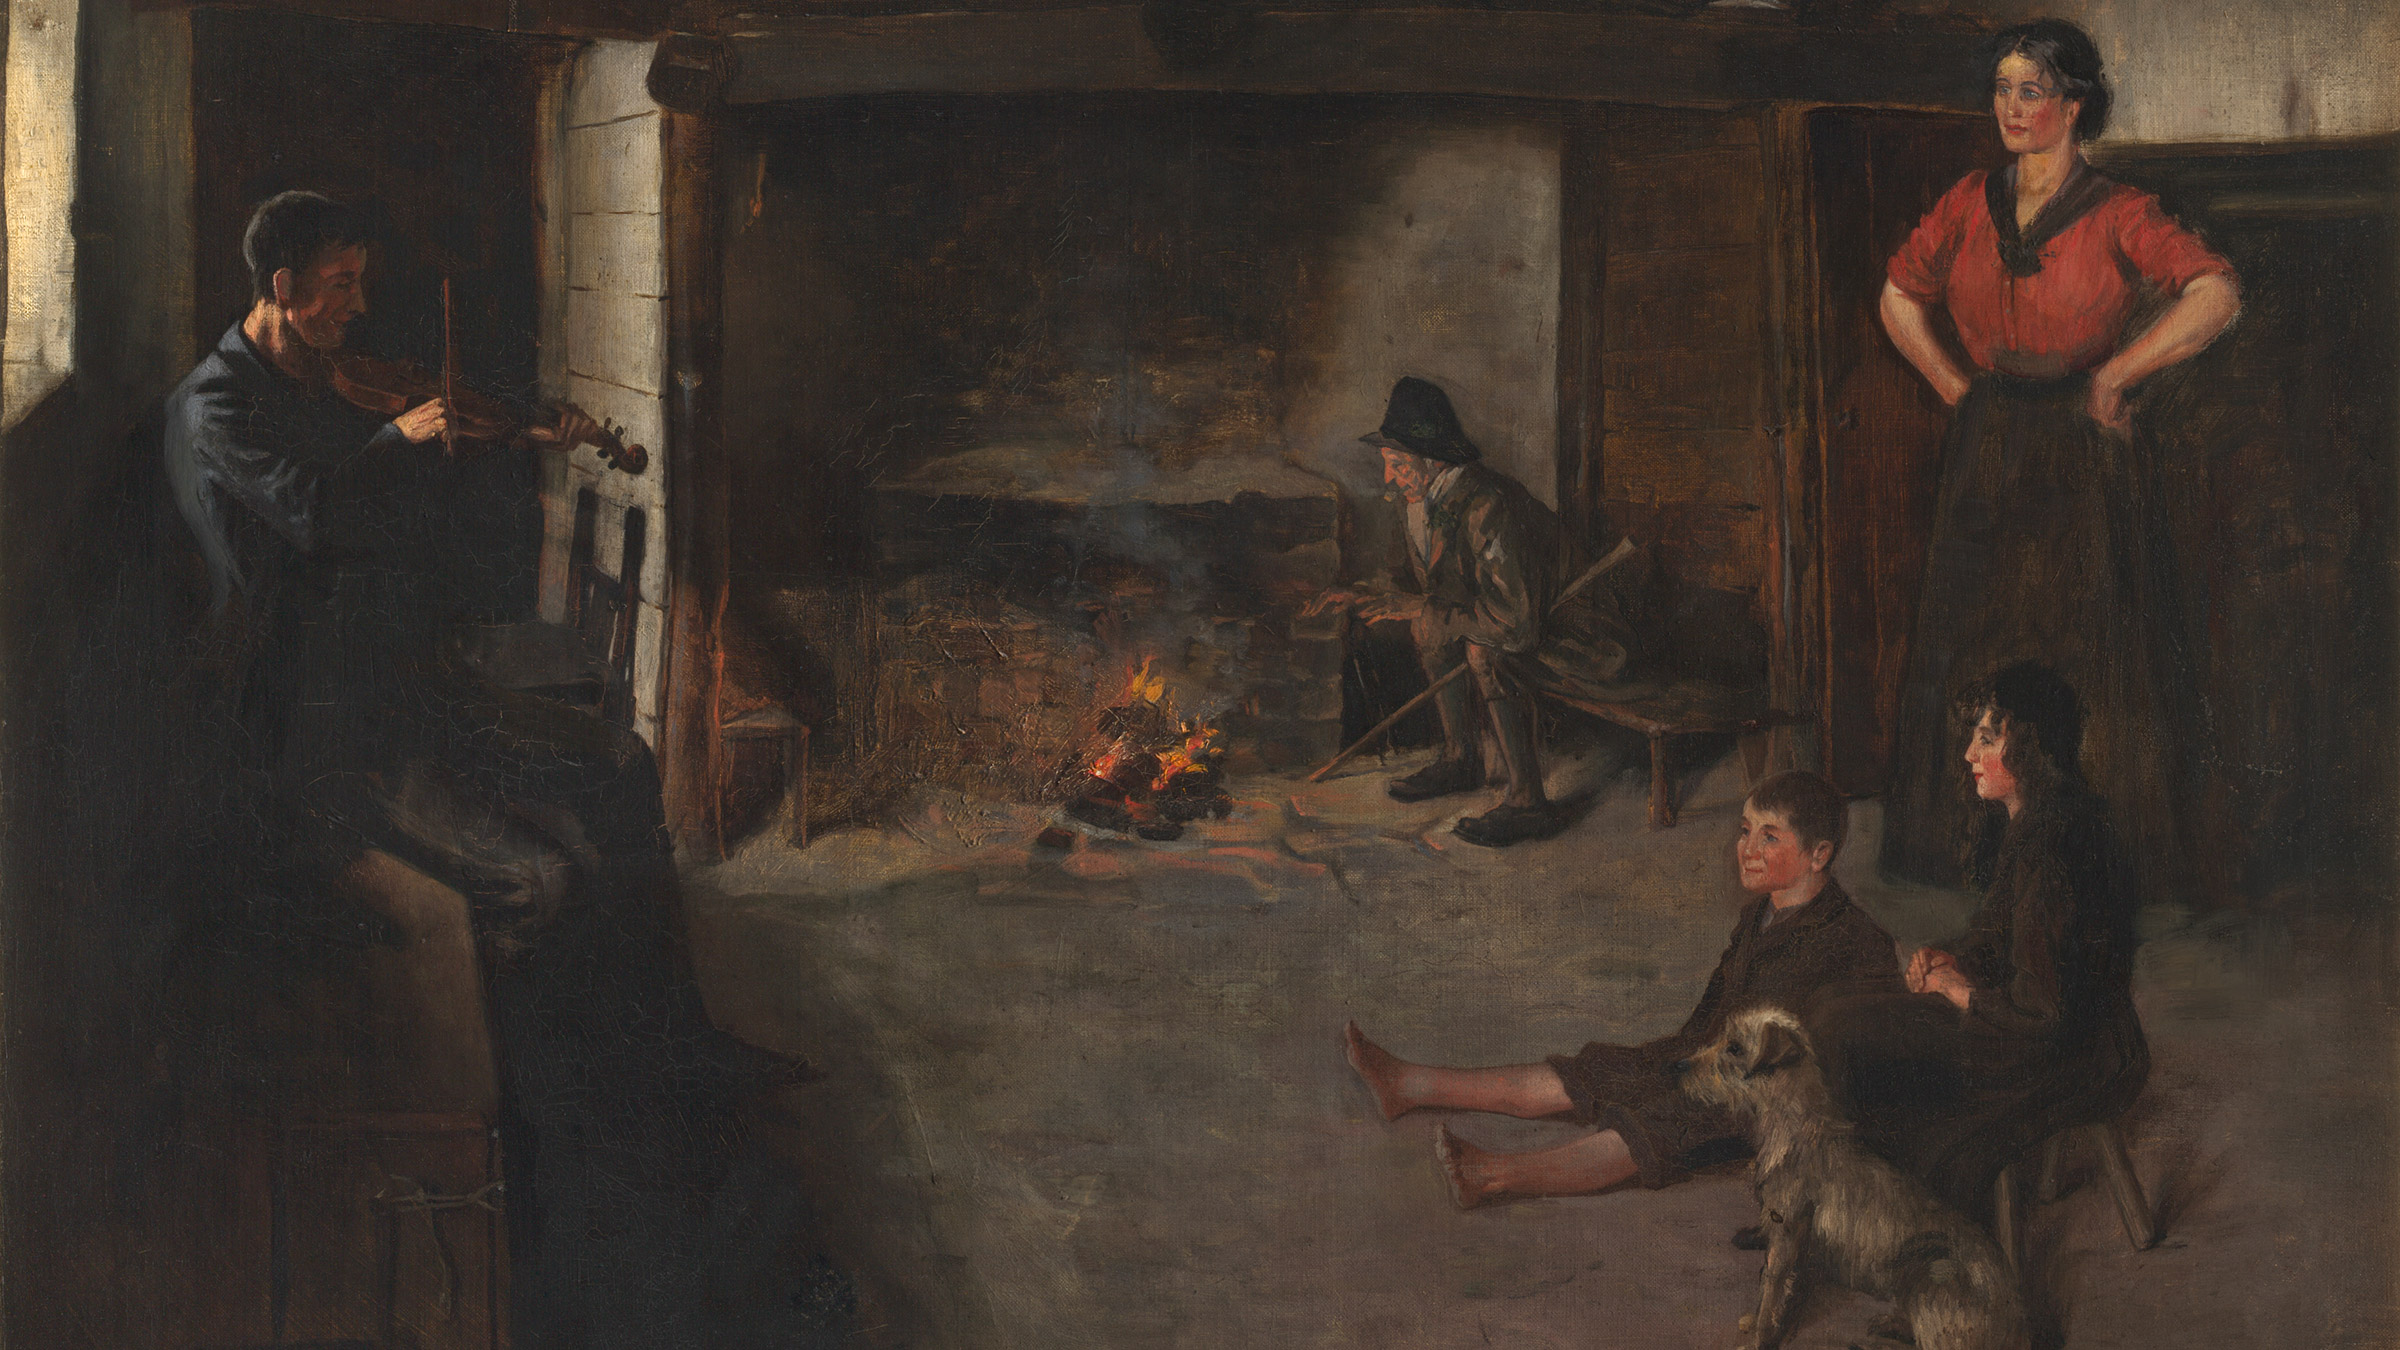 Lest We Forget (Irish Cottage Interior c.1860). Oil on canvas. Date unknown. Photo by Frank Poole. Irish School. Copyright Frank Poole 2012.